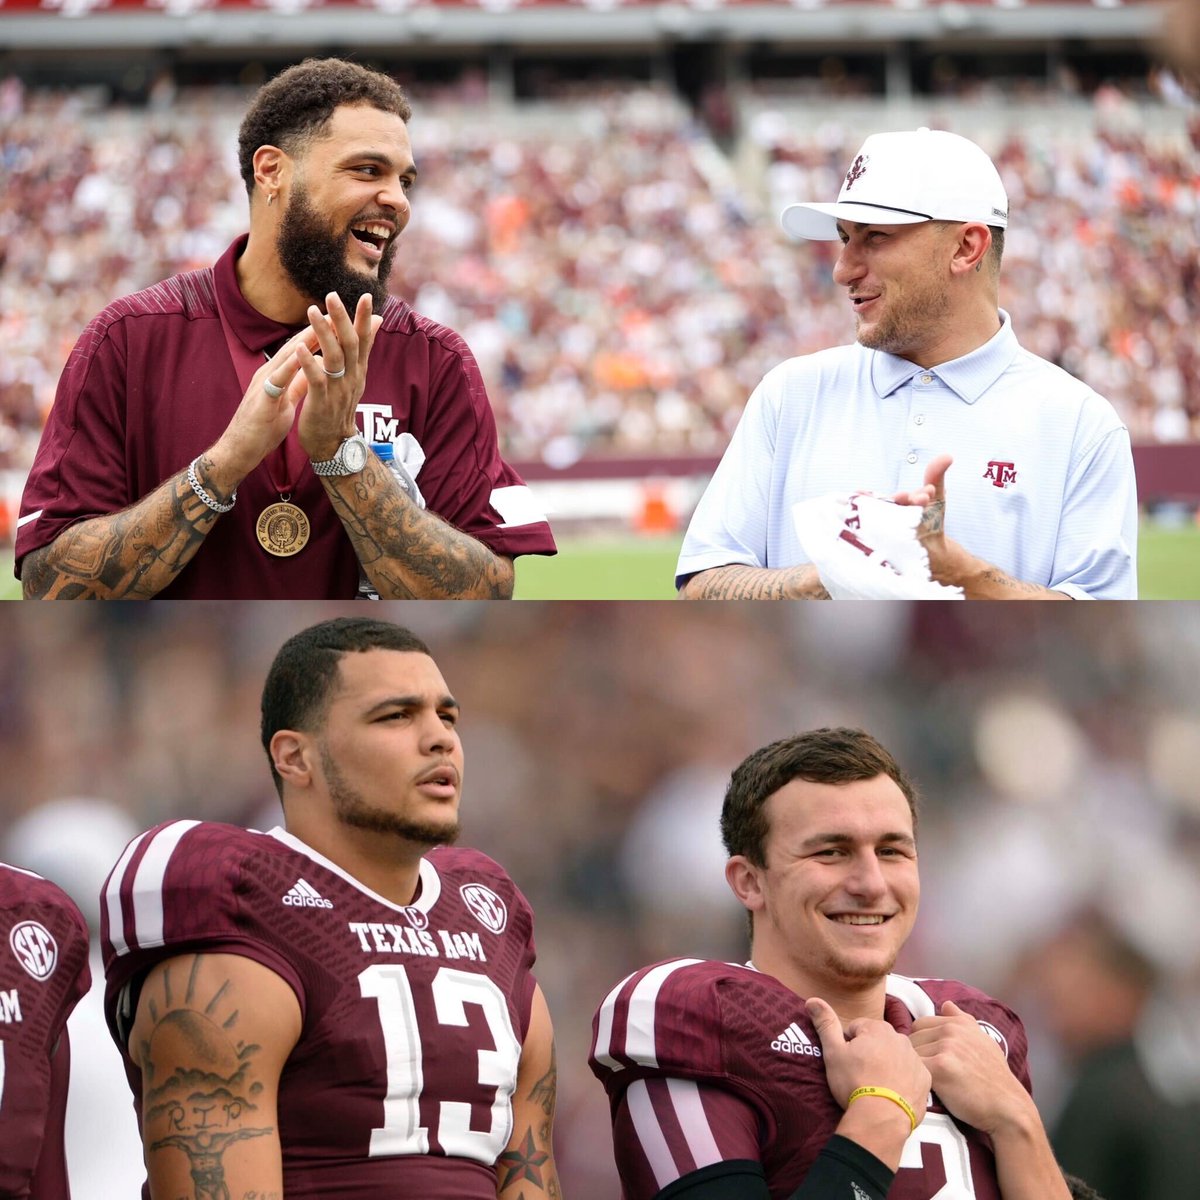 Johnny Manziel and Mike Evans show love to Texas A&M for the first game of the season 🙌🏈 (via @AggieFootball)